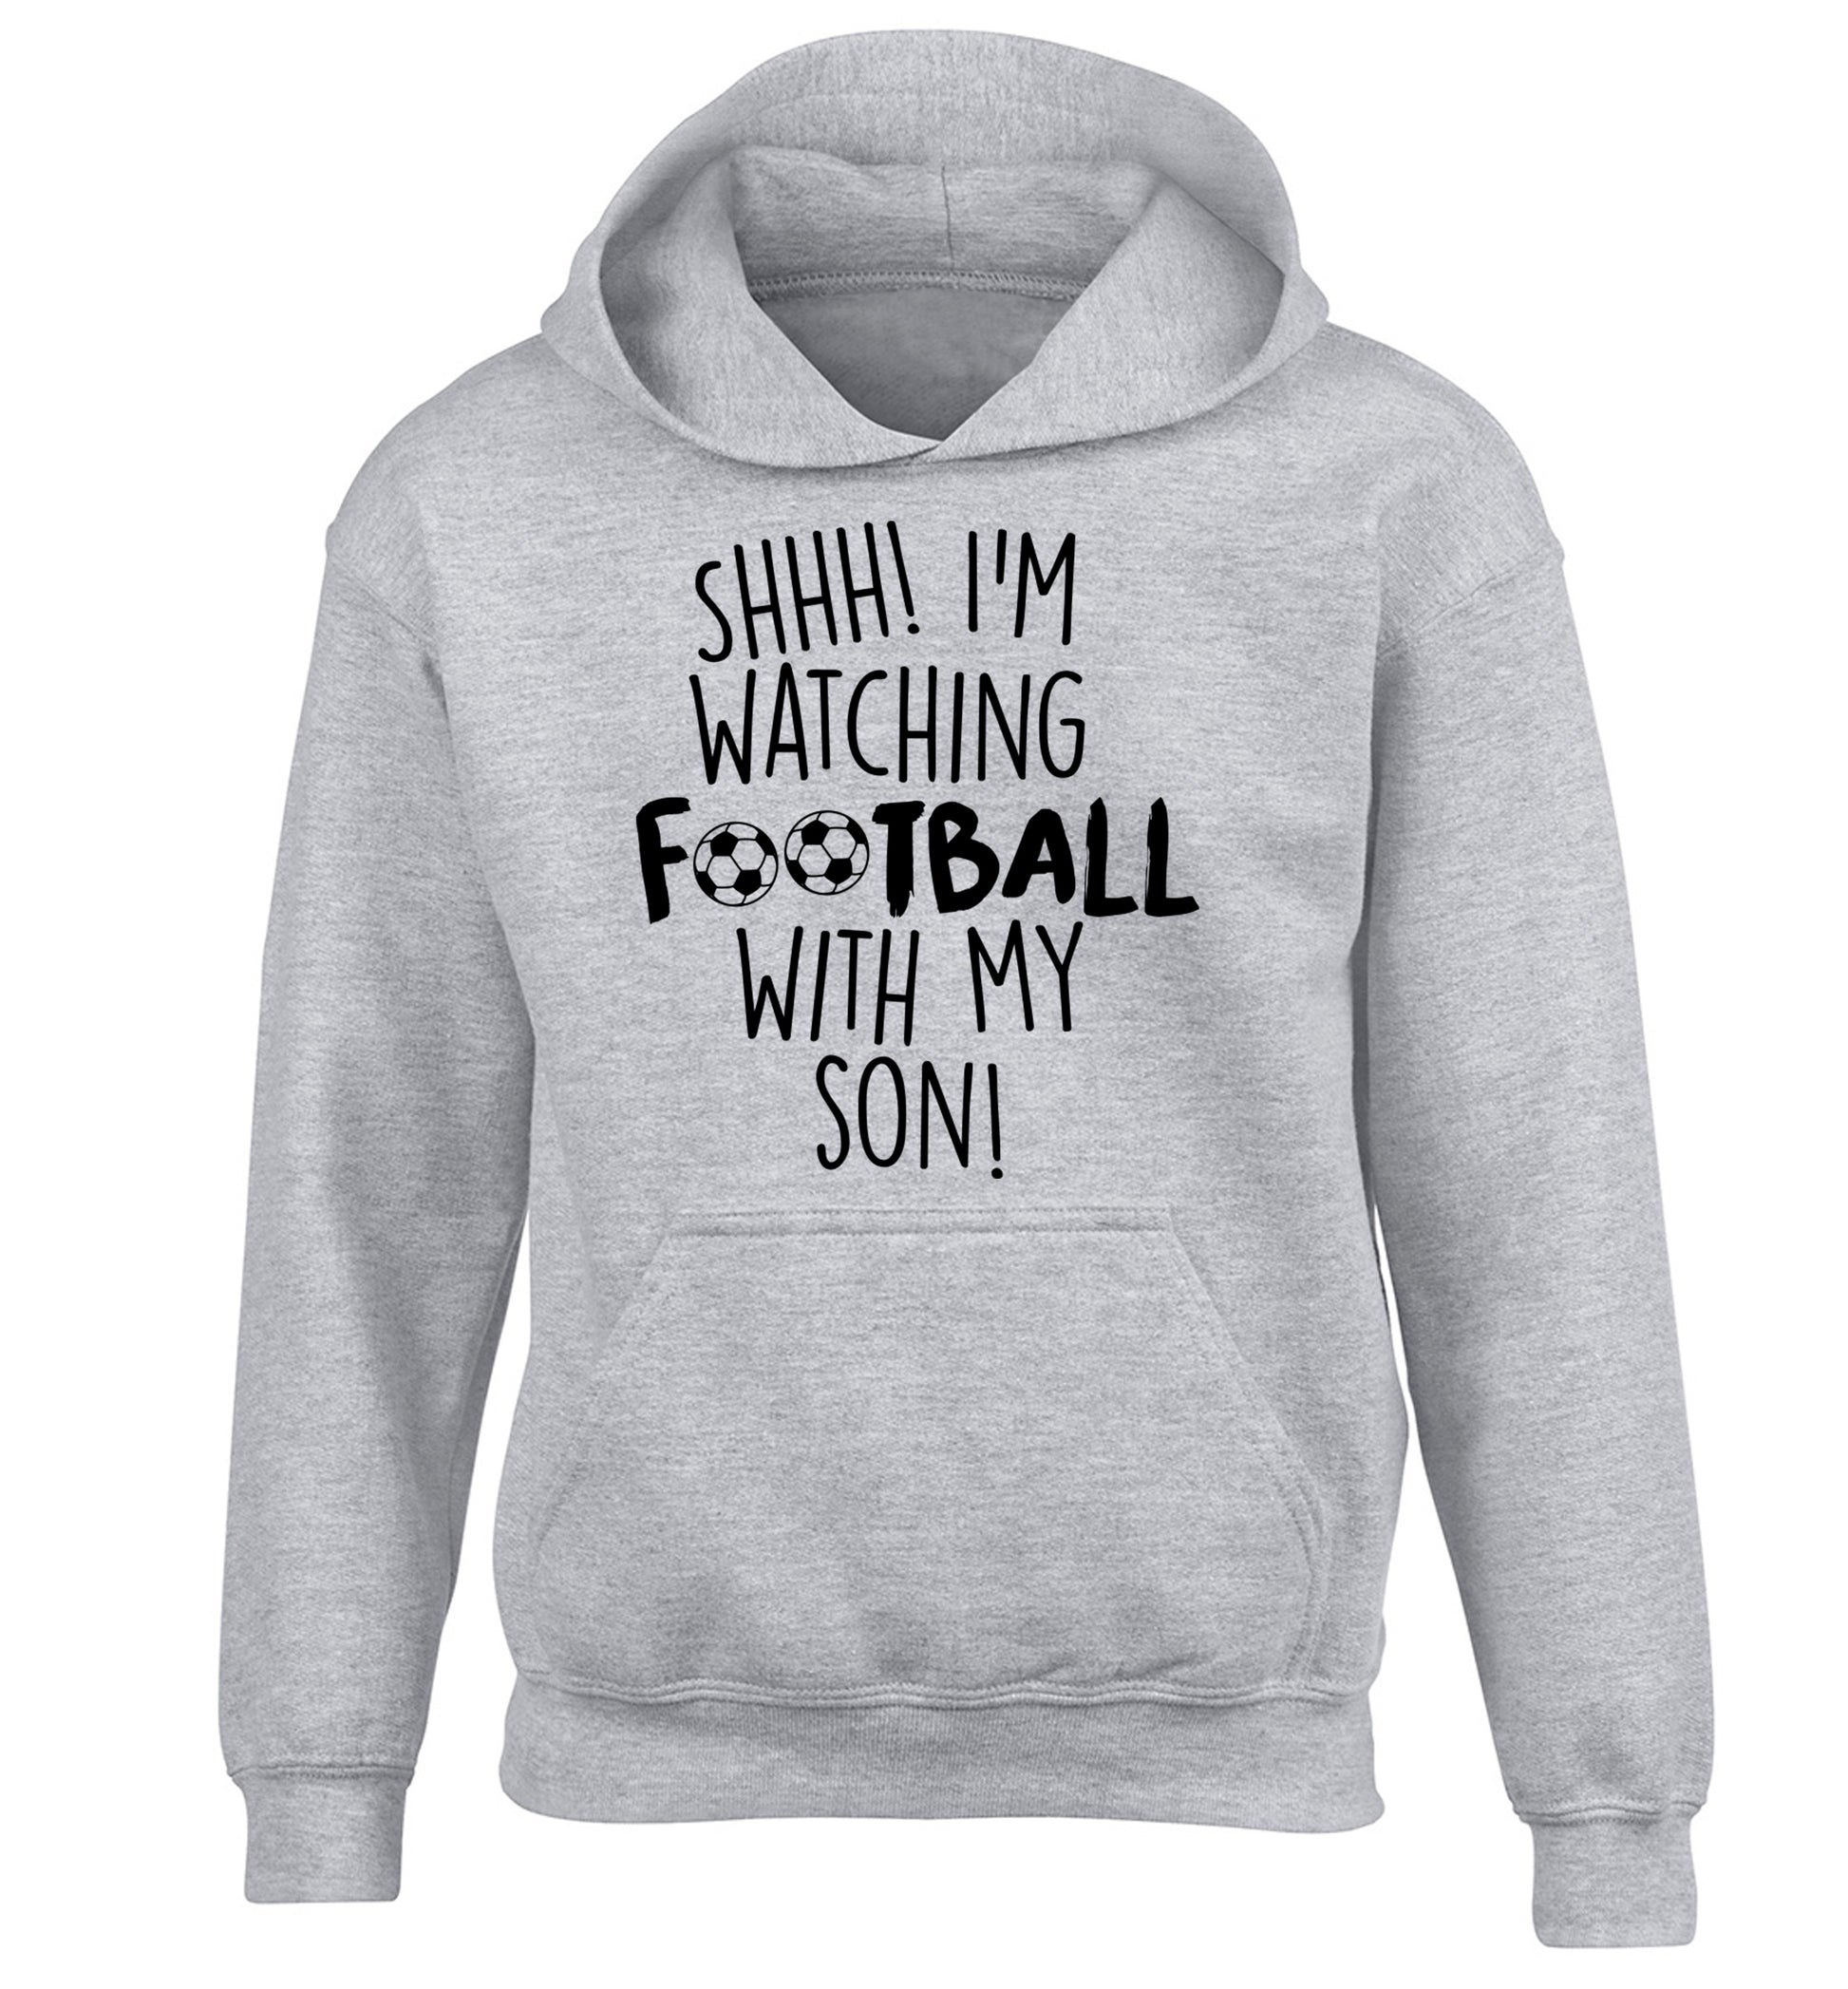 Shhh I'm watching football with my son children's grey hoodie 12-14 Years